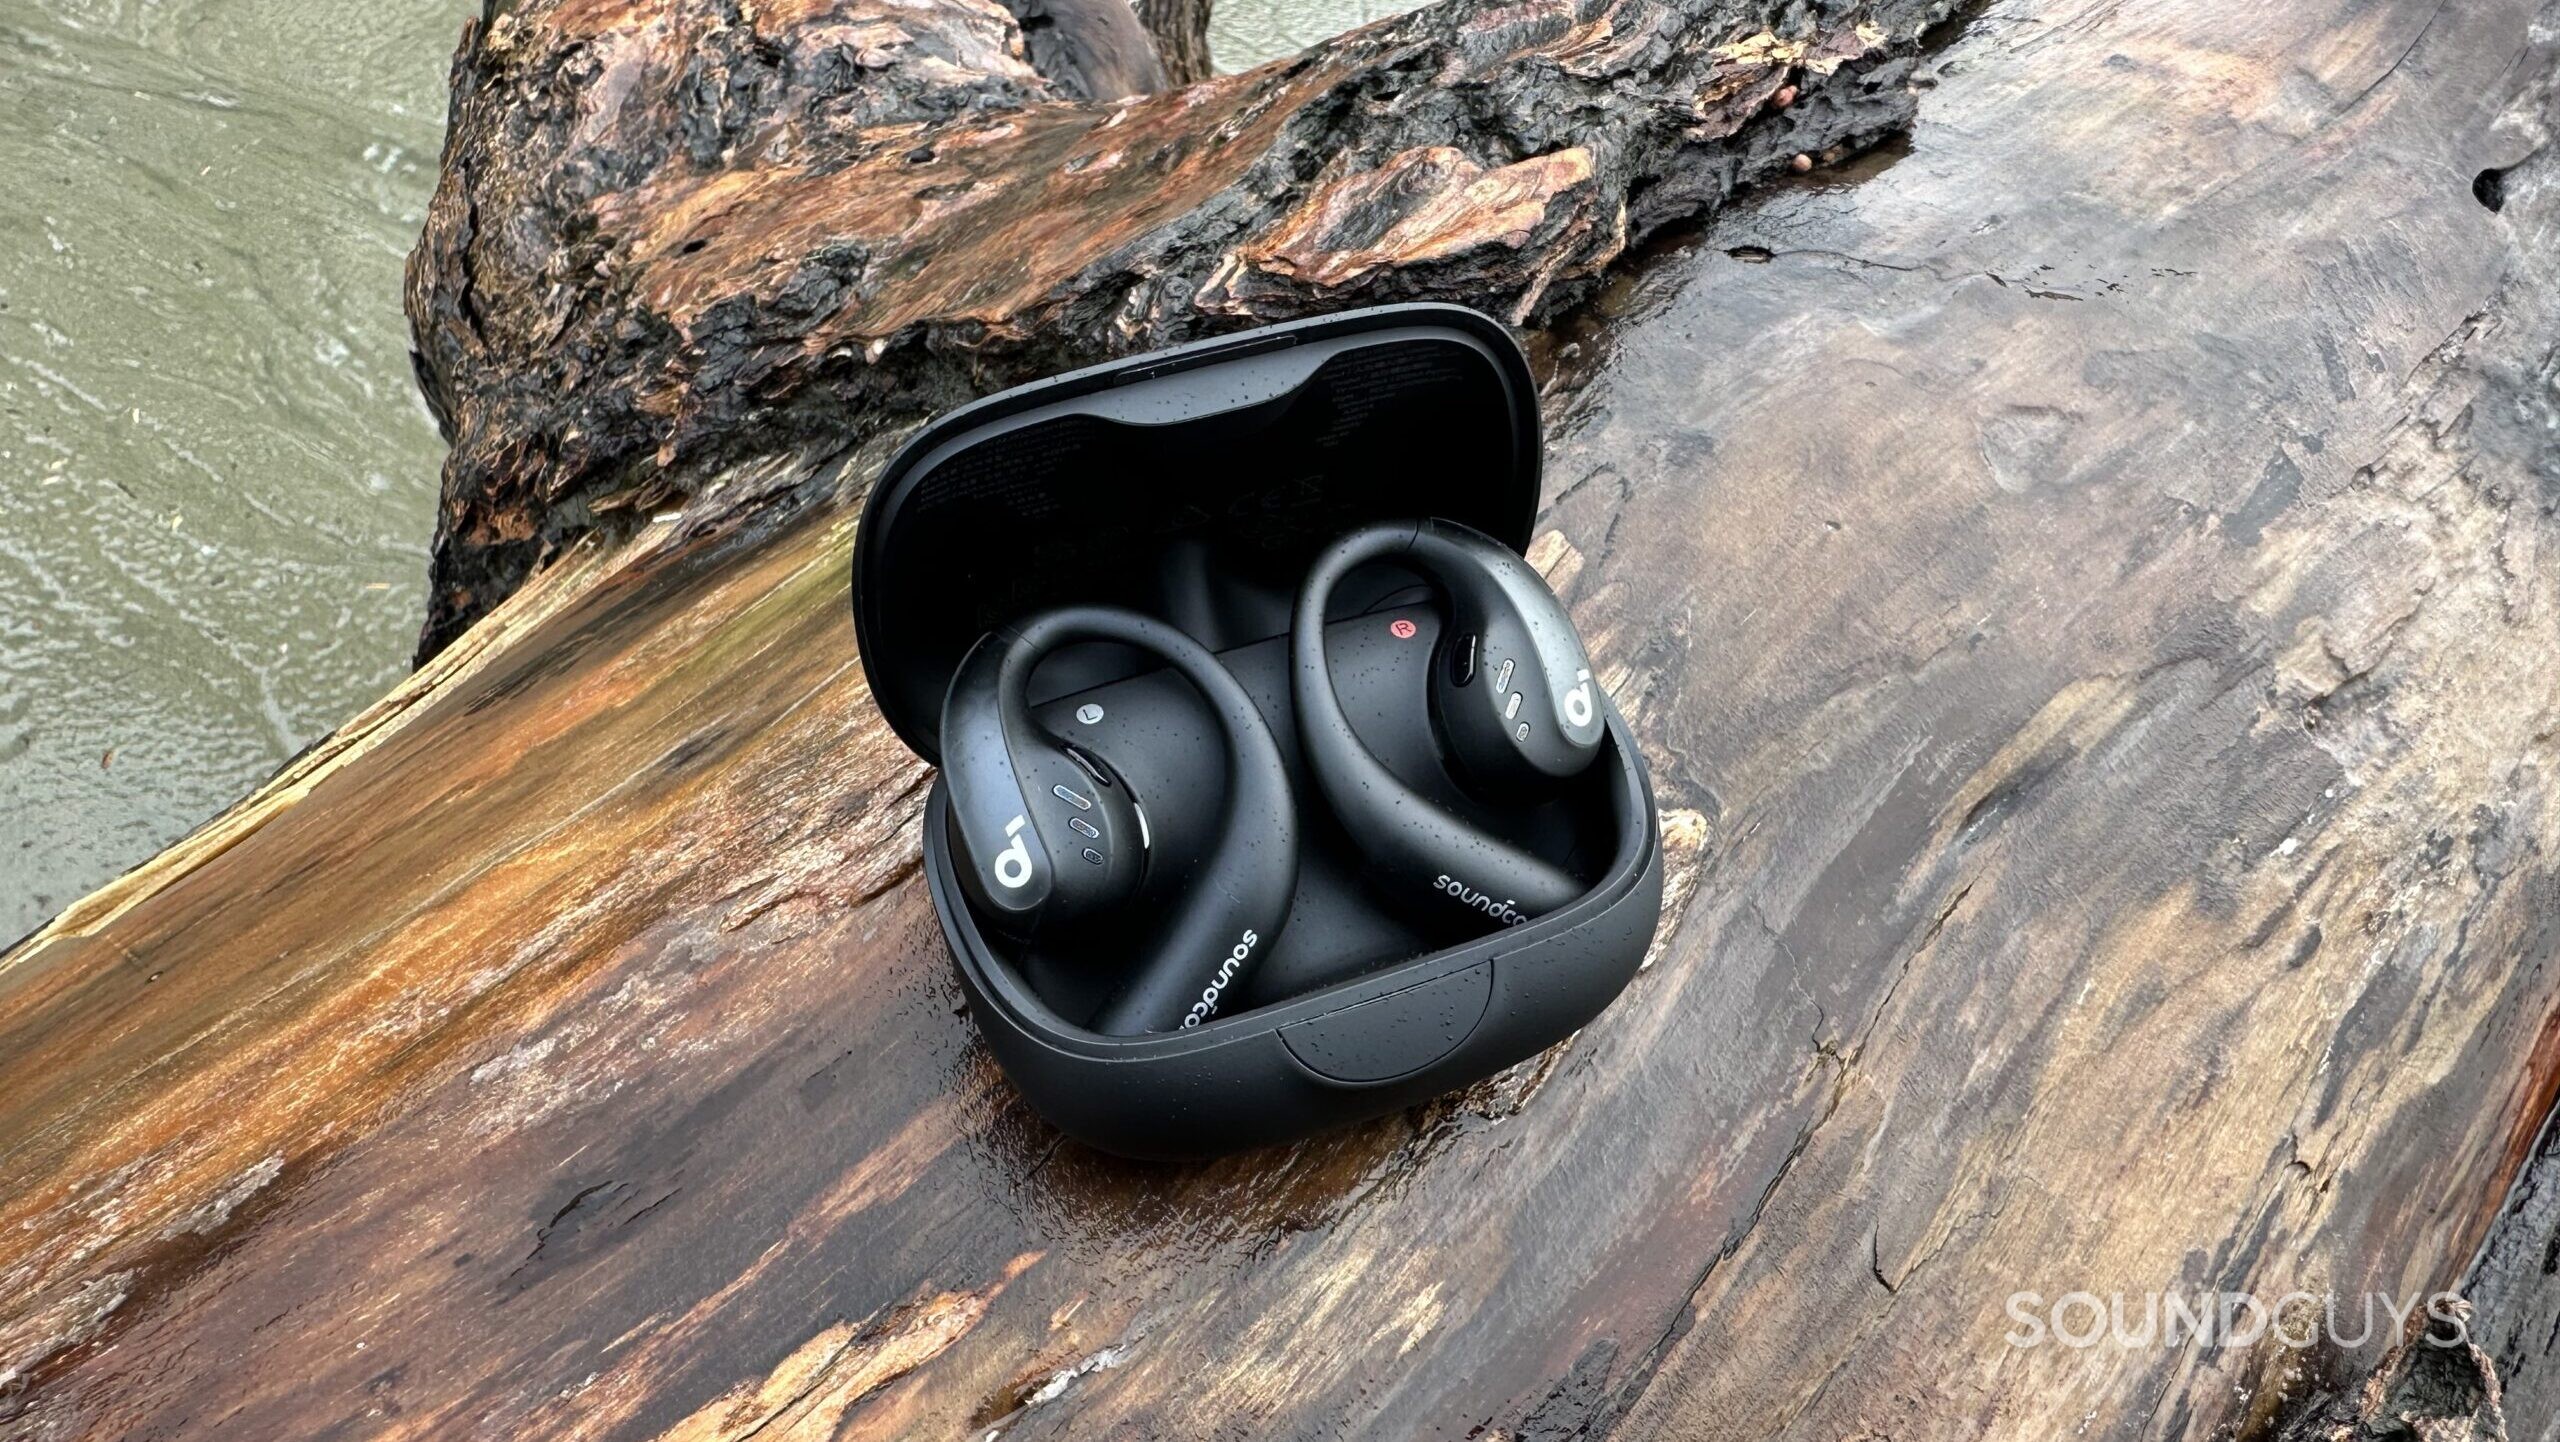 The AeroFit Pro earbuds inside their charging case.